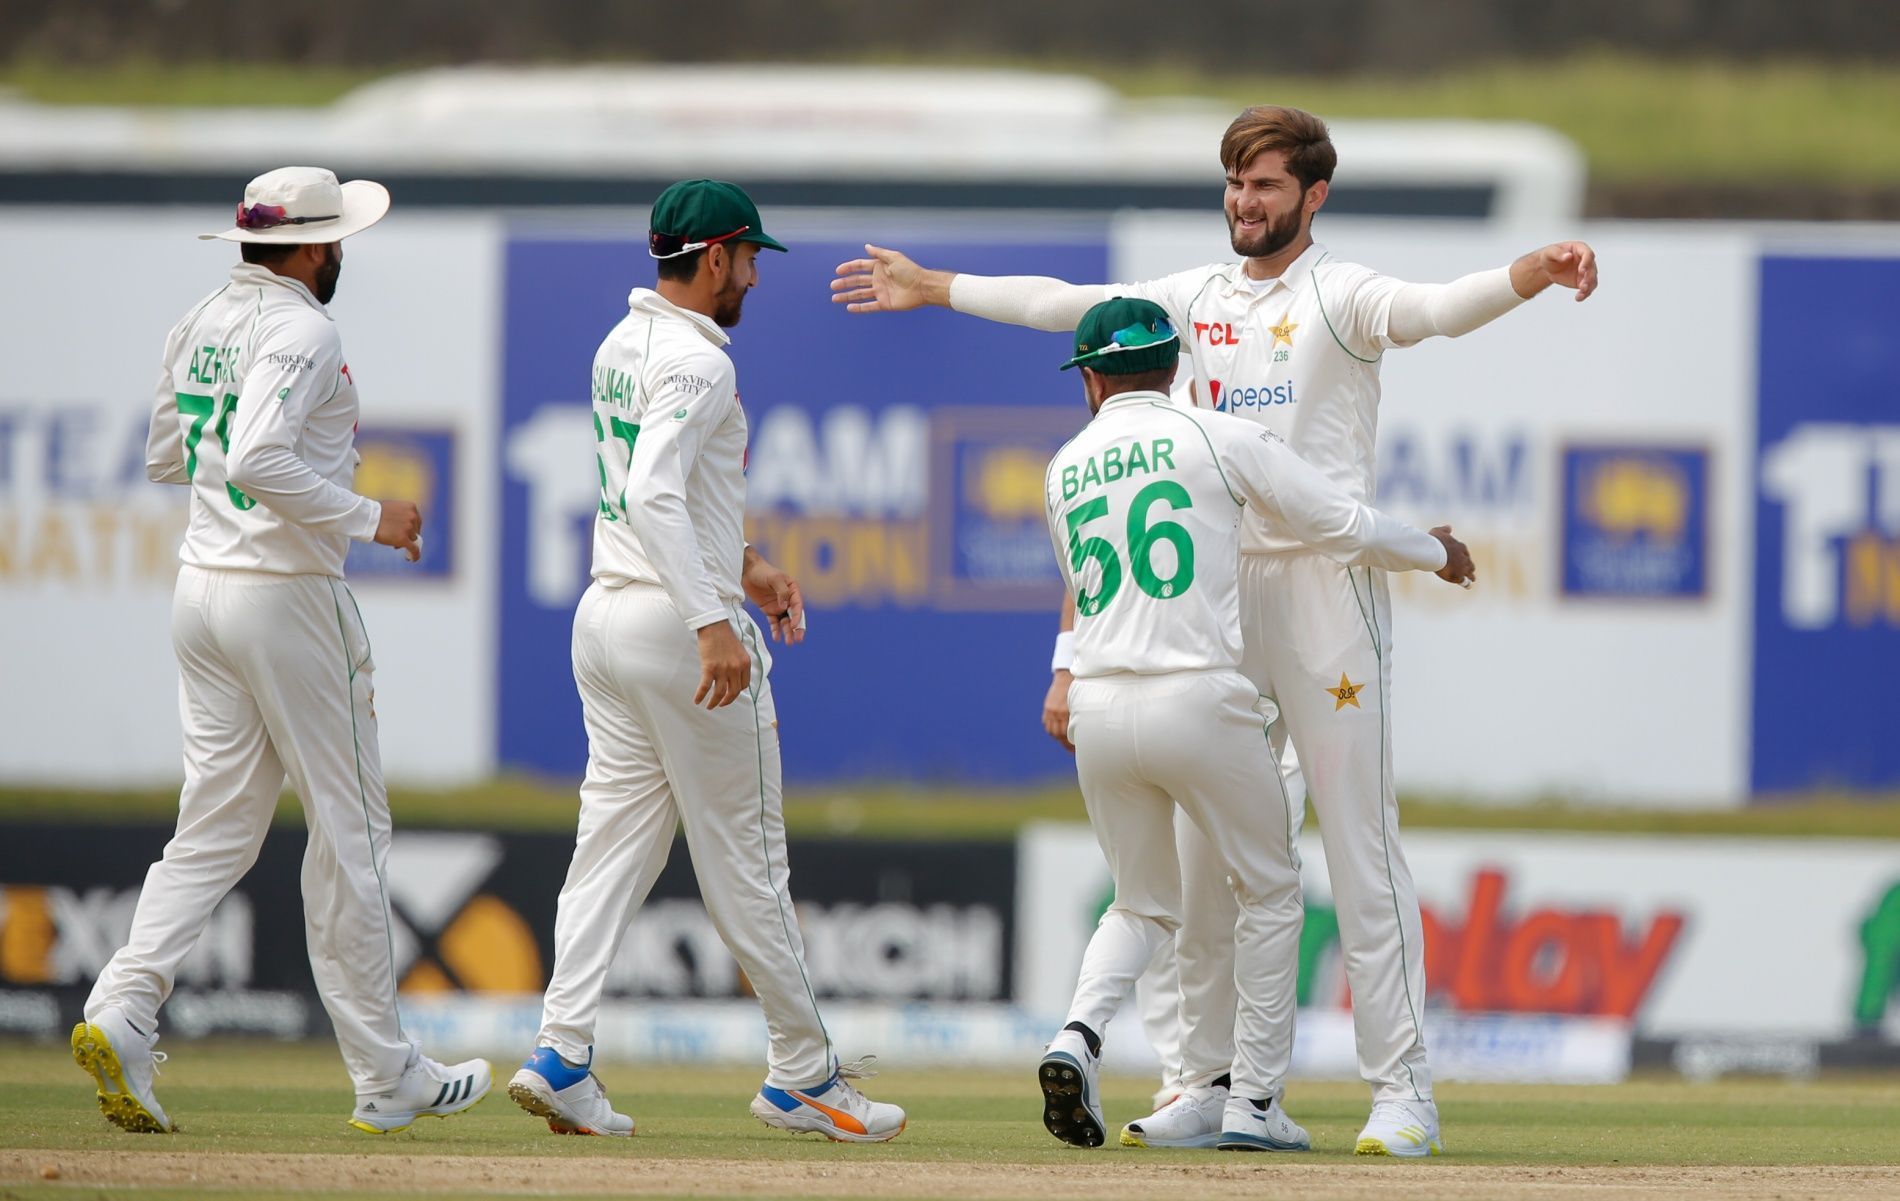 Shaheen Afridi celebrates one of his three wickets on Day 1 of the Galle Test. Pic: Sri Lanka Cricket